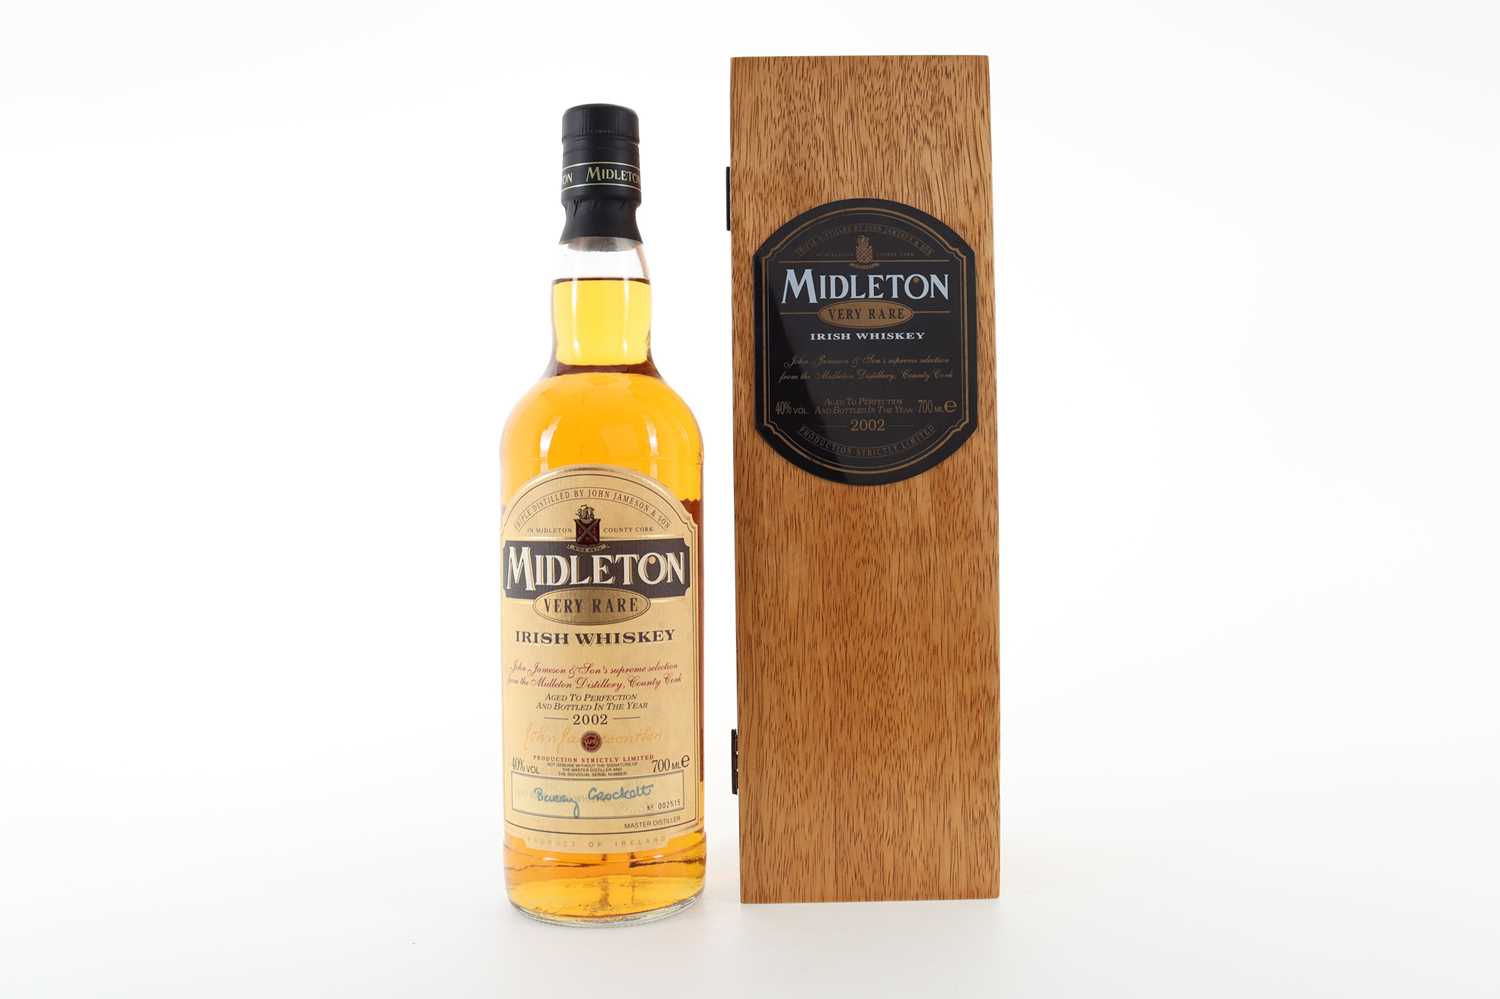 Lot 204 - MIDLETON VERY RARE 2002 RELEASE